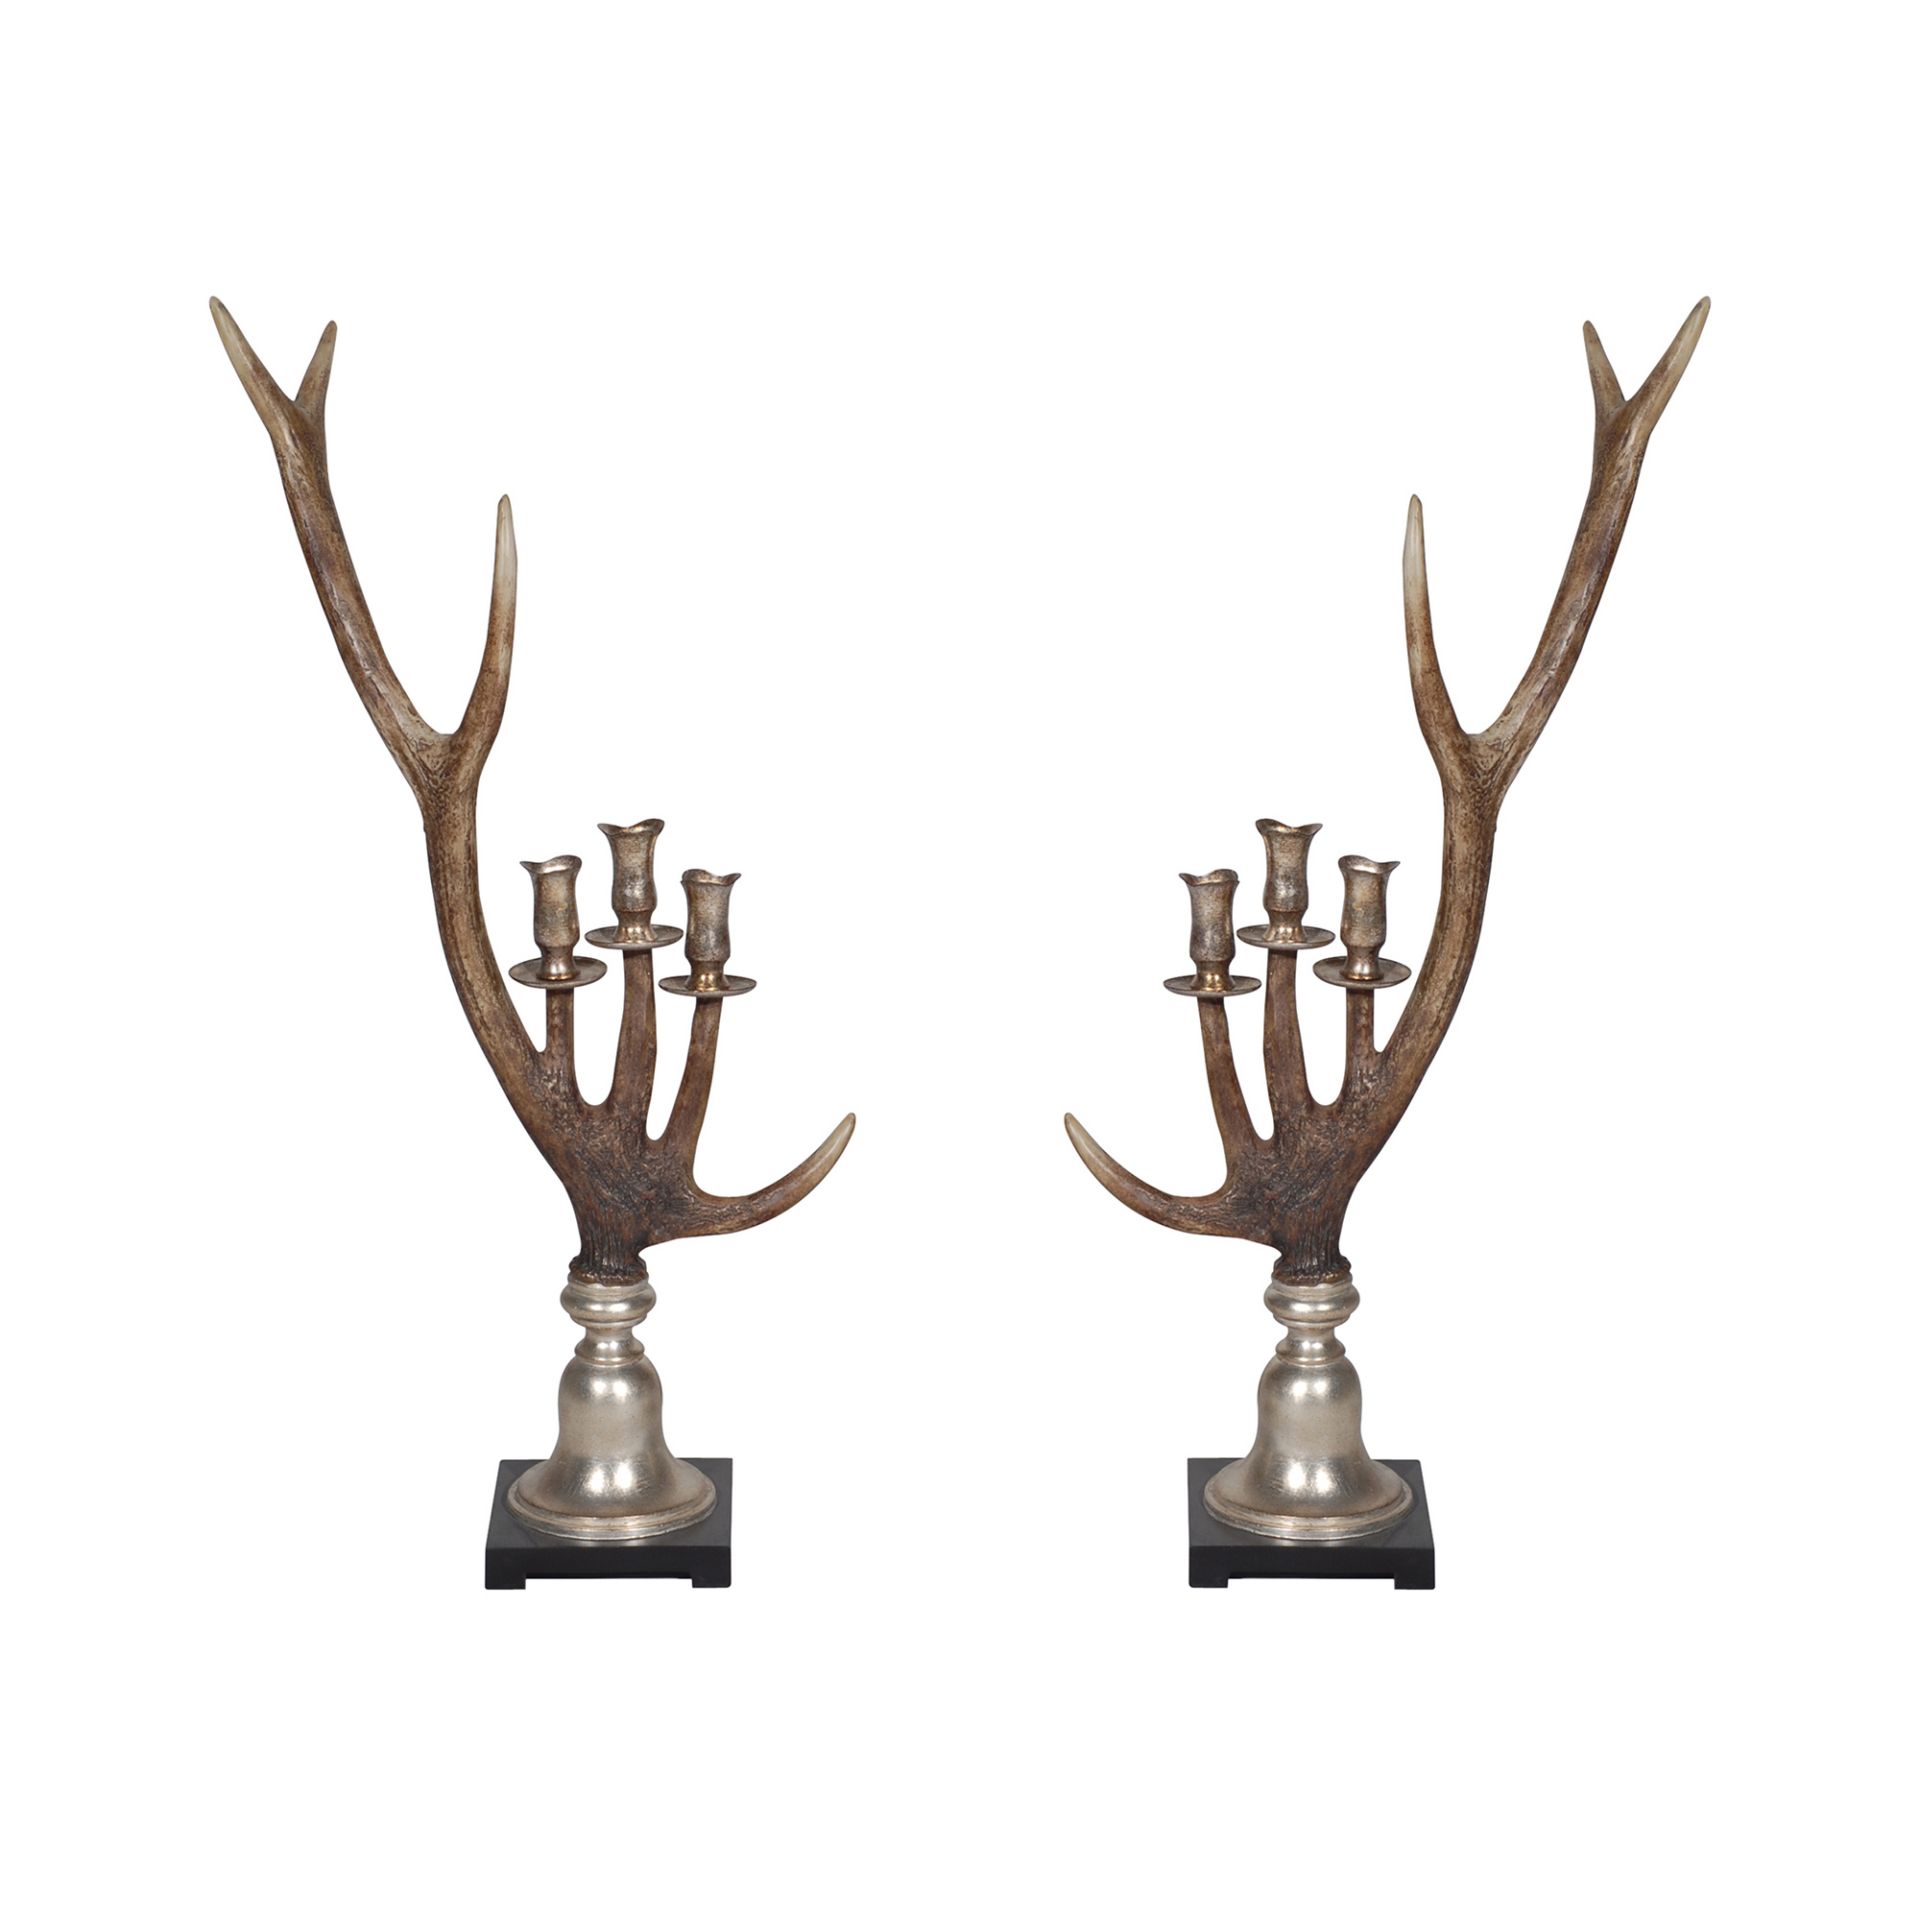 A Pair Antler Candle Holders Naturally Shed Antlers Have Been A Key Feature Of Hunting Lodges - Image 3 of 3